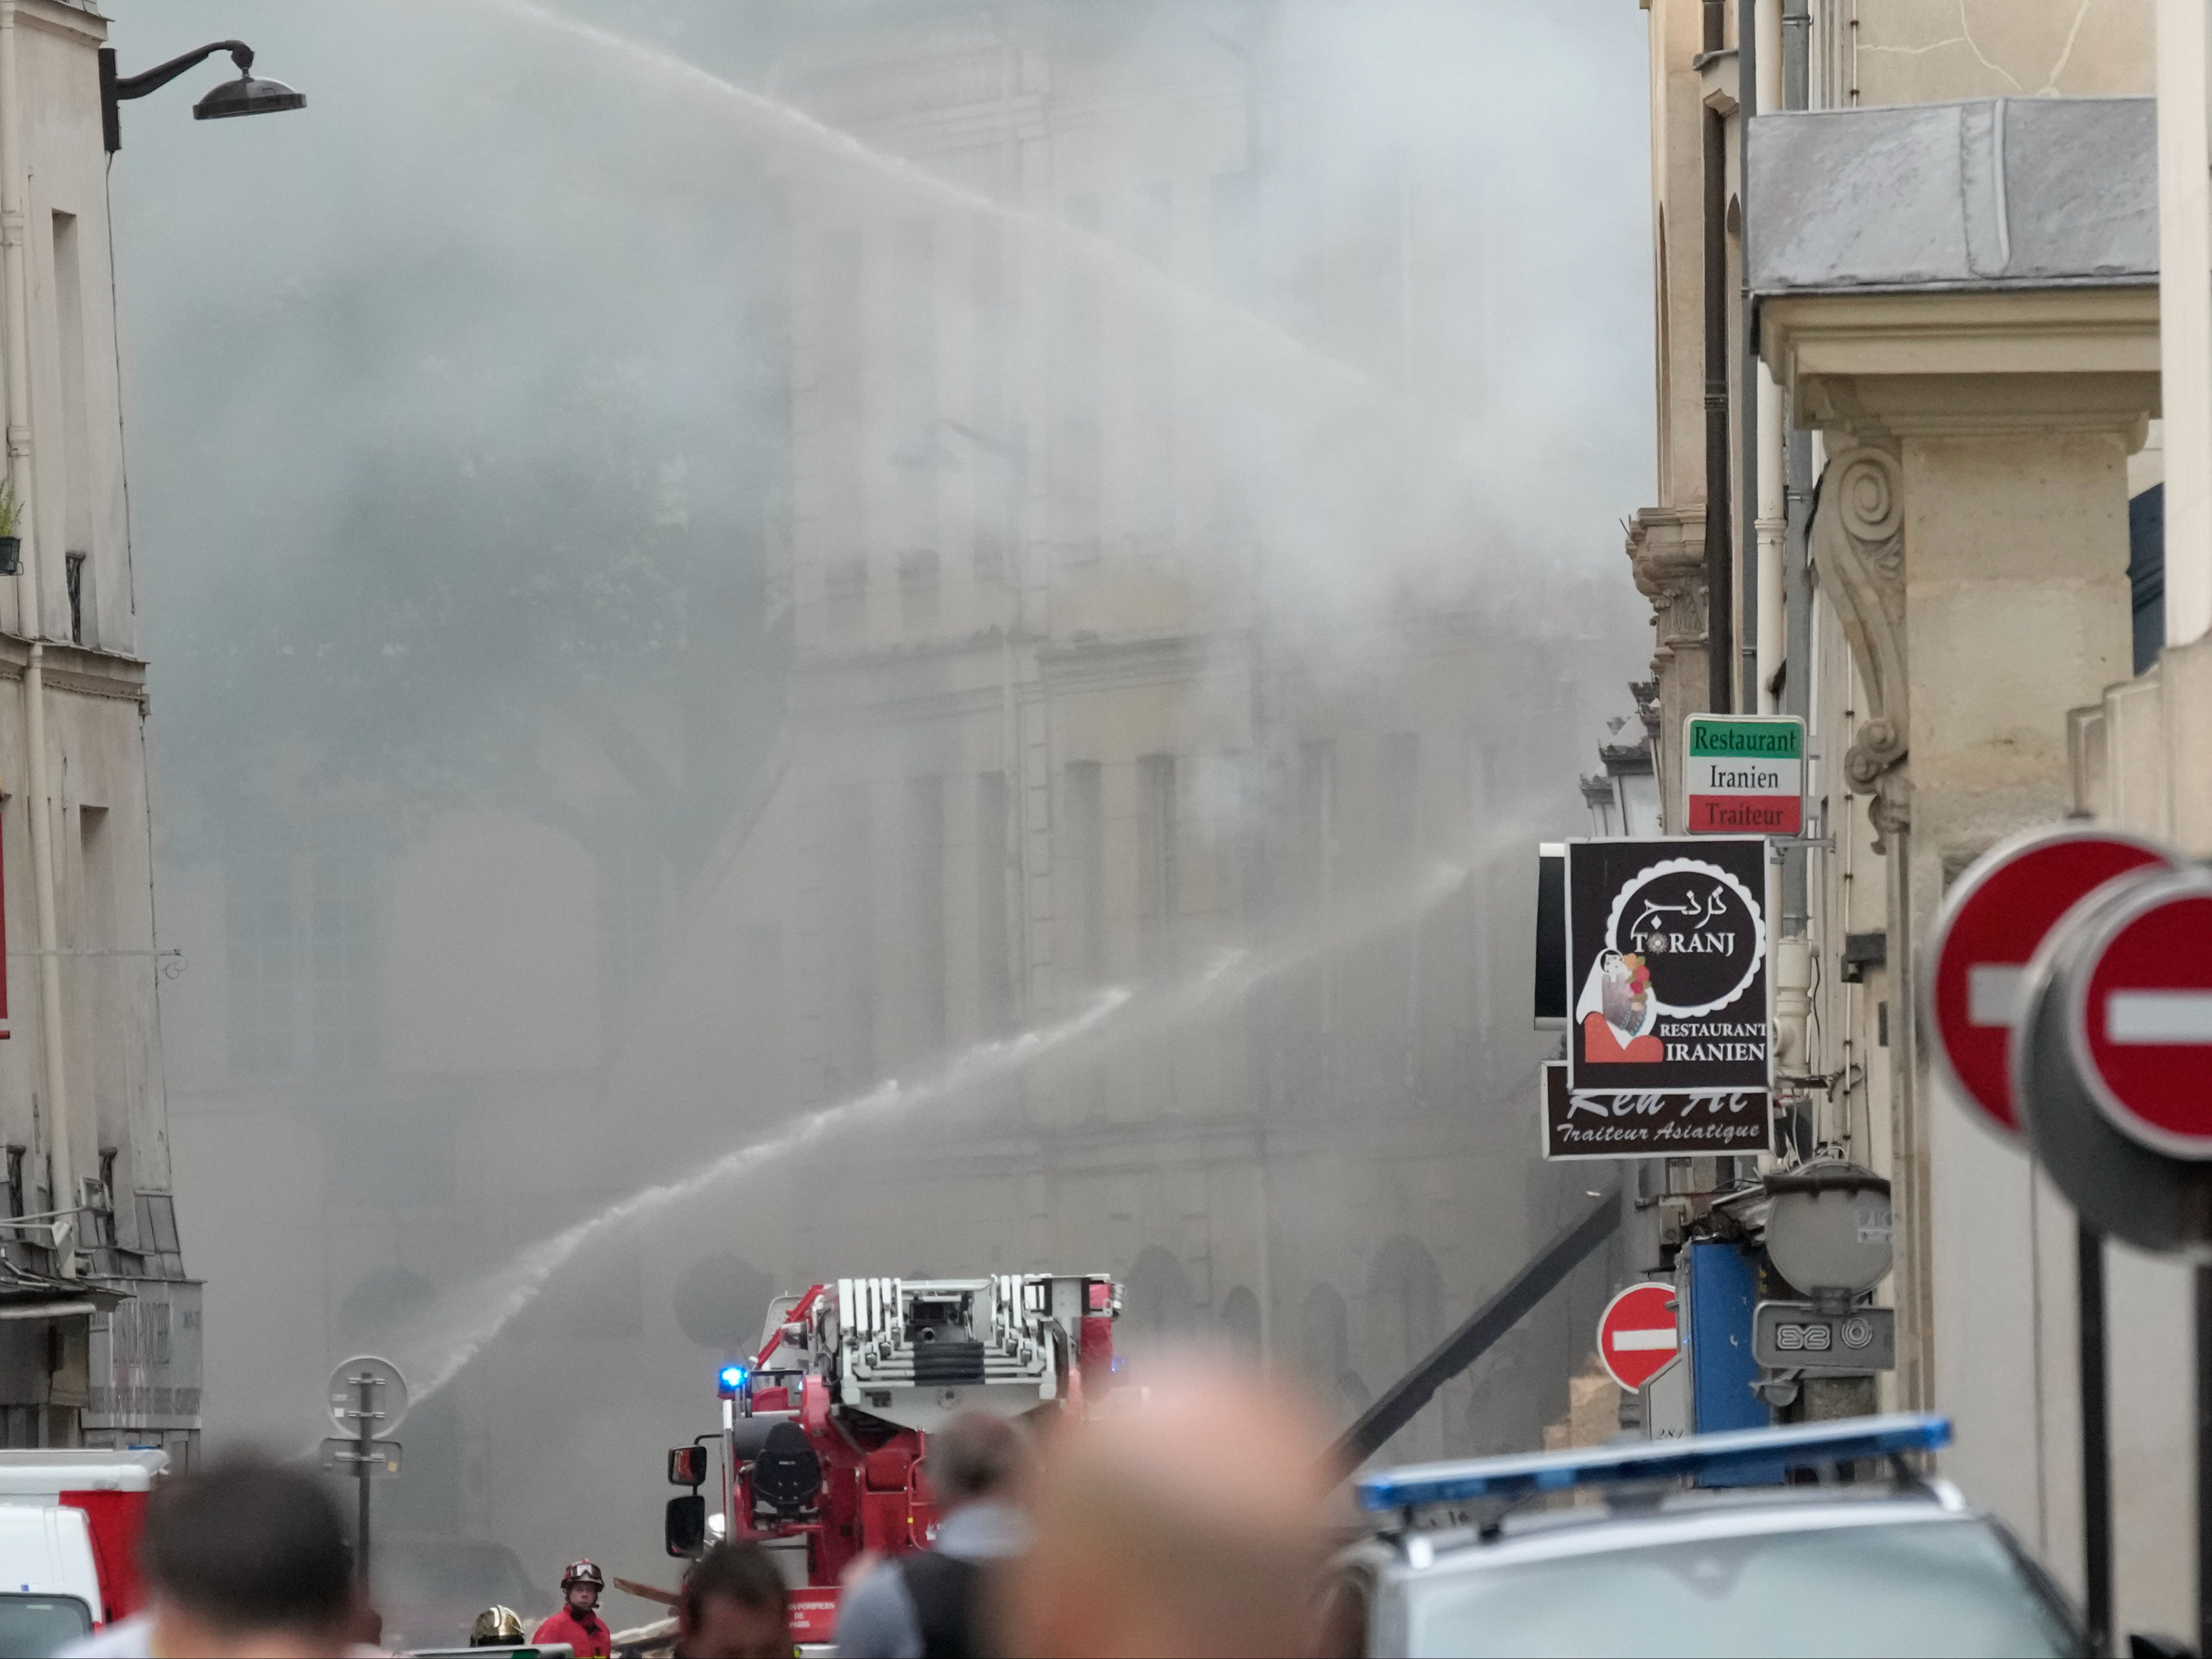 Firemen use a water canon to put out the blaze